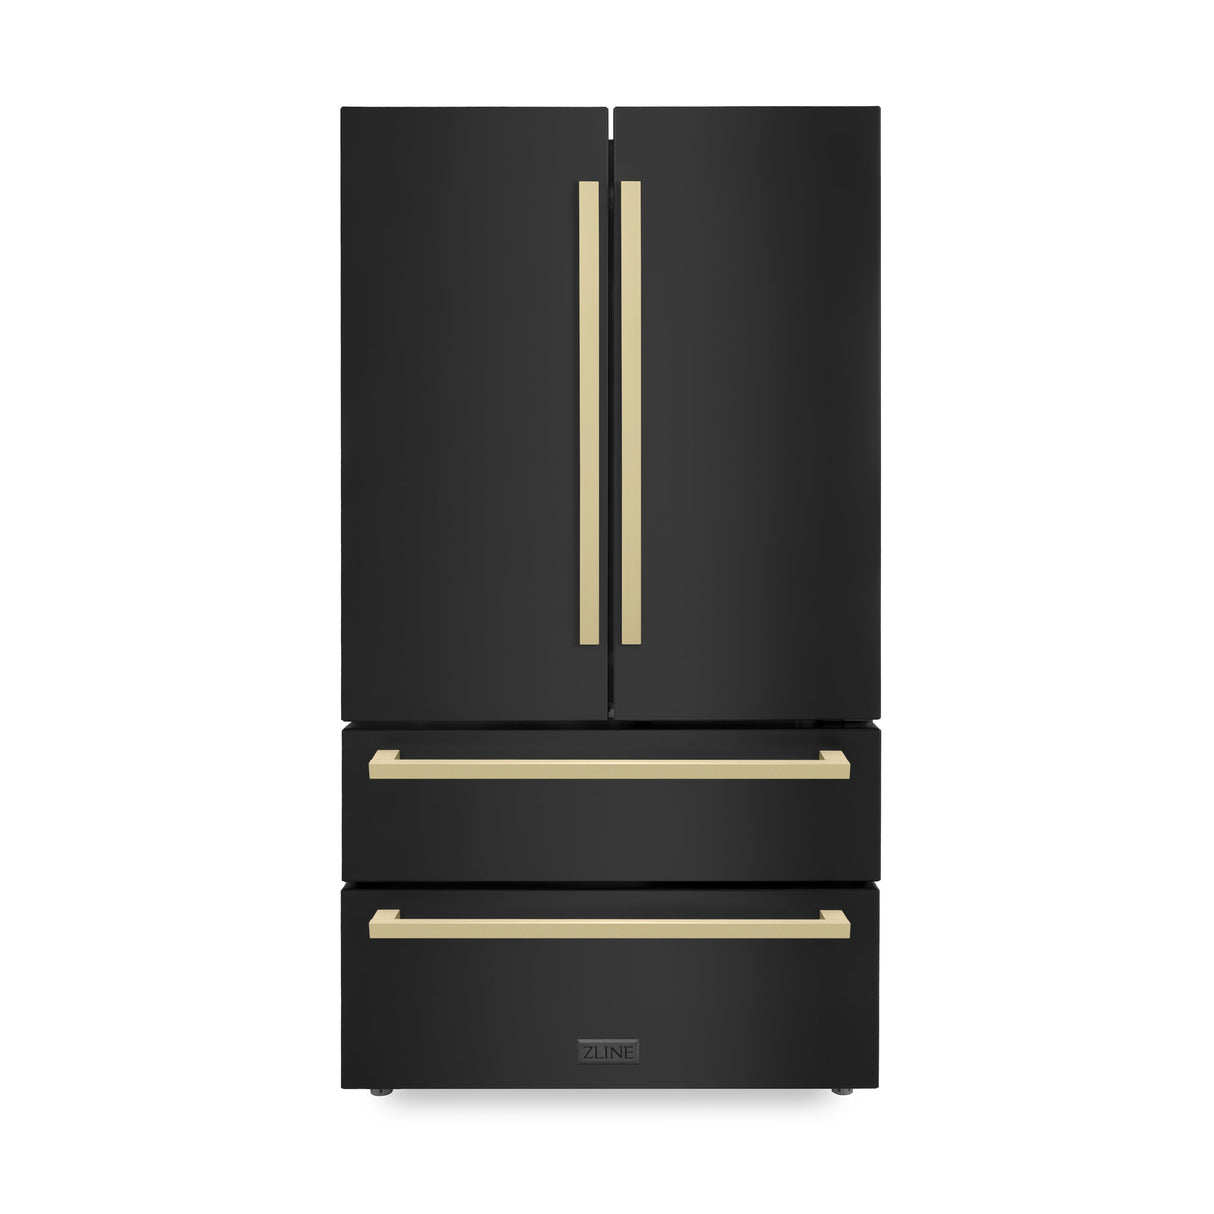 ZLINE Autograph Edition 36 in. 22.5 cu. ft 4-Door French Door Refrigerator with Ice Maker in Black Stainless Steel with Champagne Bronze Square Handles (RFMZ-36-BS-FCB)